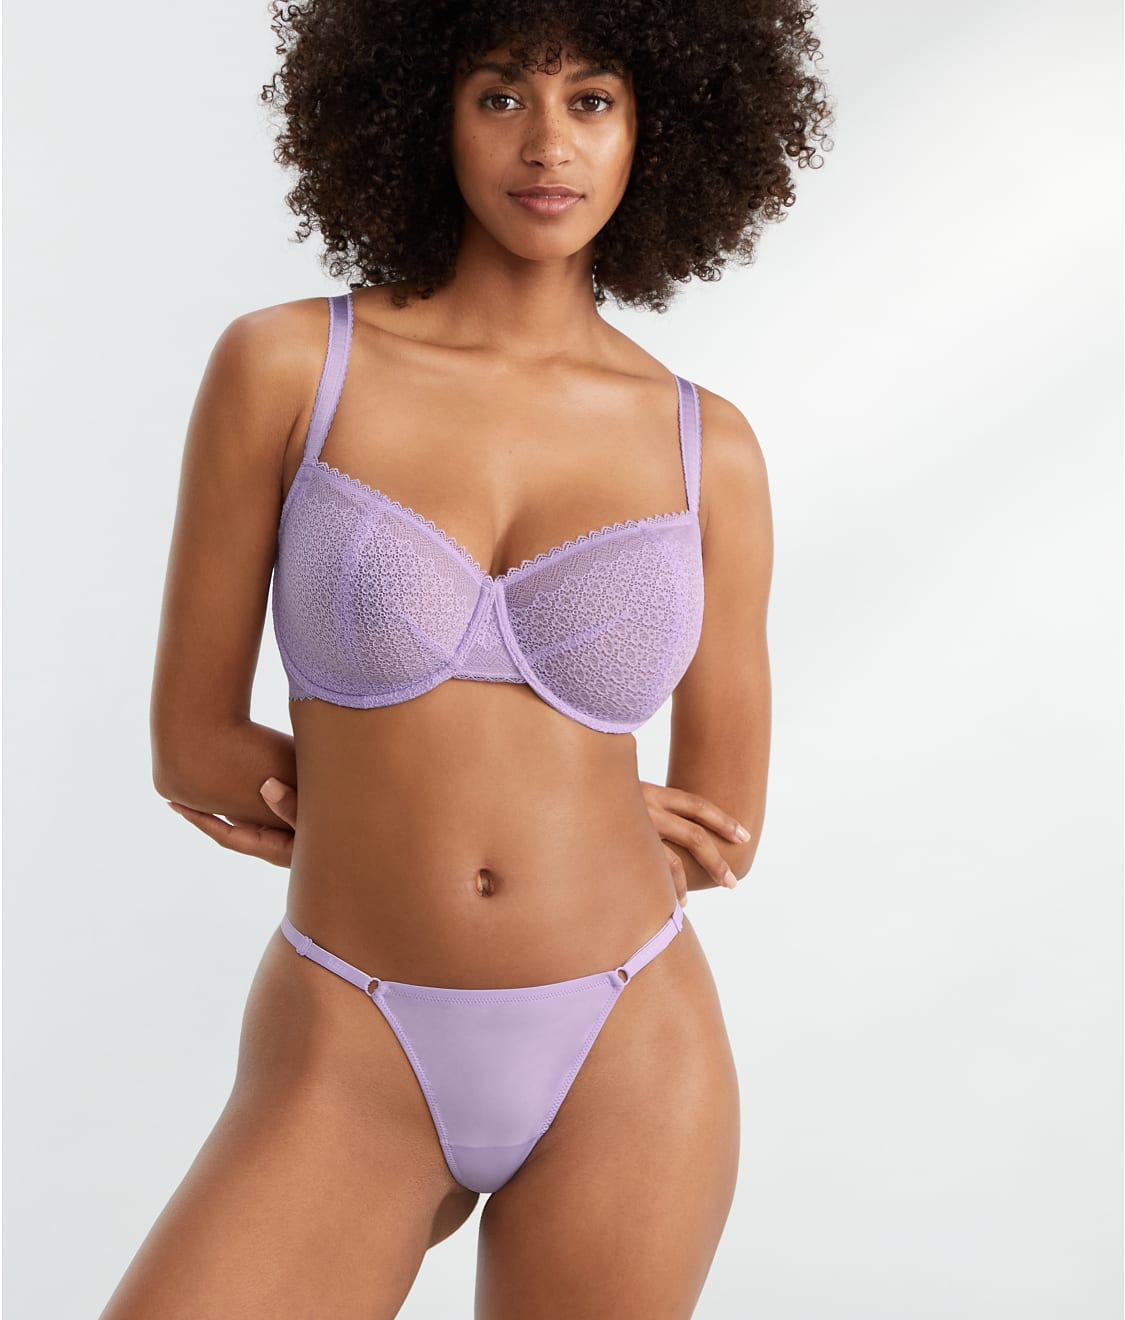 Bare: The Adjustable G-String P30315